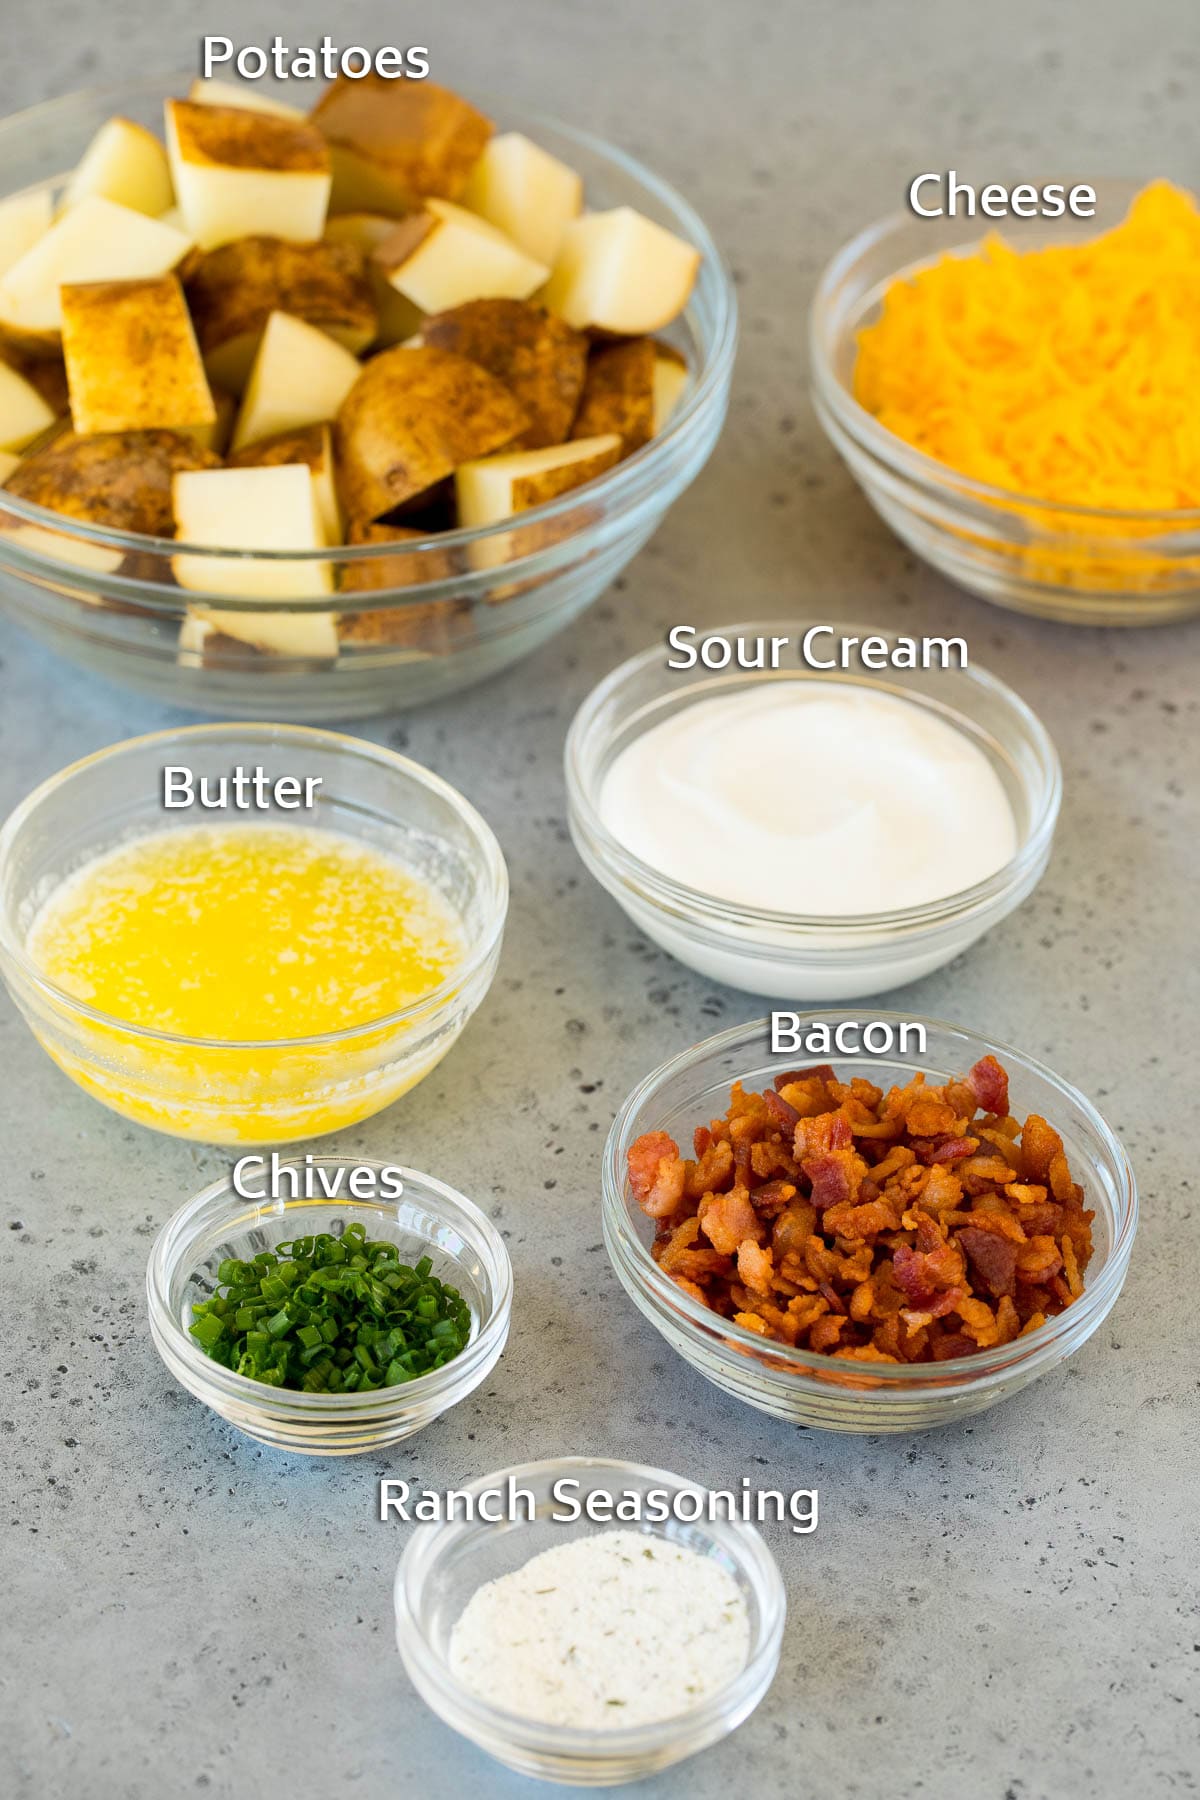 Bowls of ingredients including potatoes, butter, ranch seasoning, cheese and bacon.